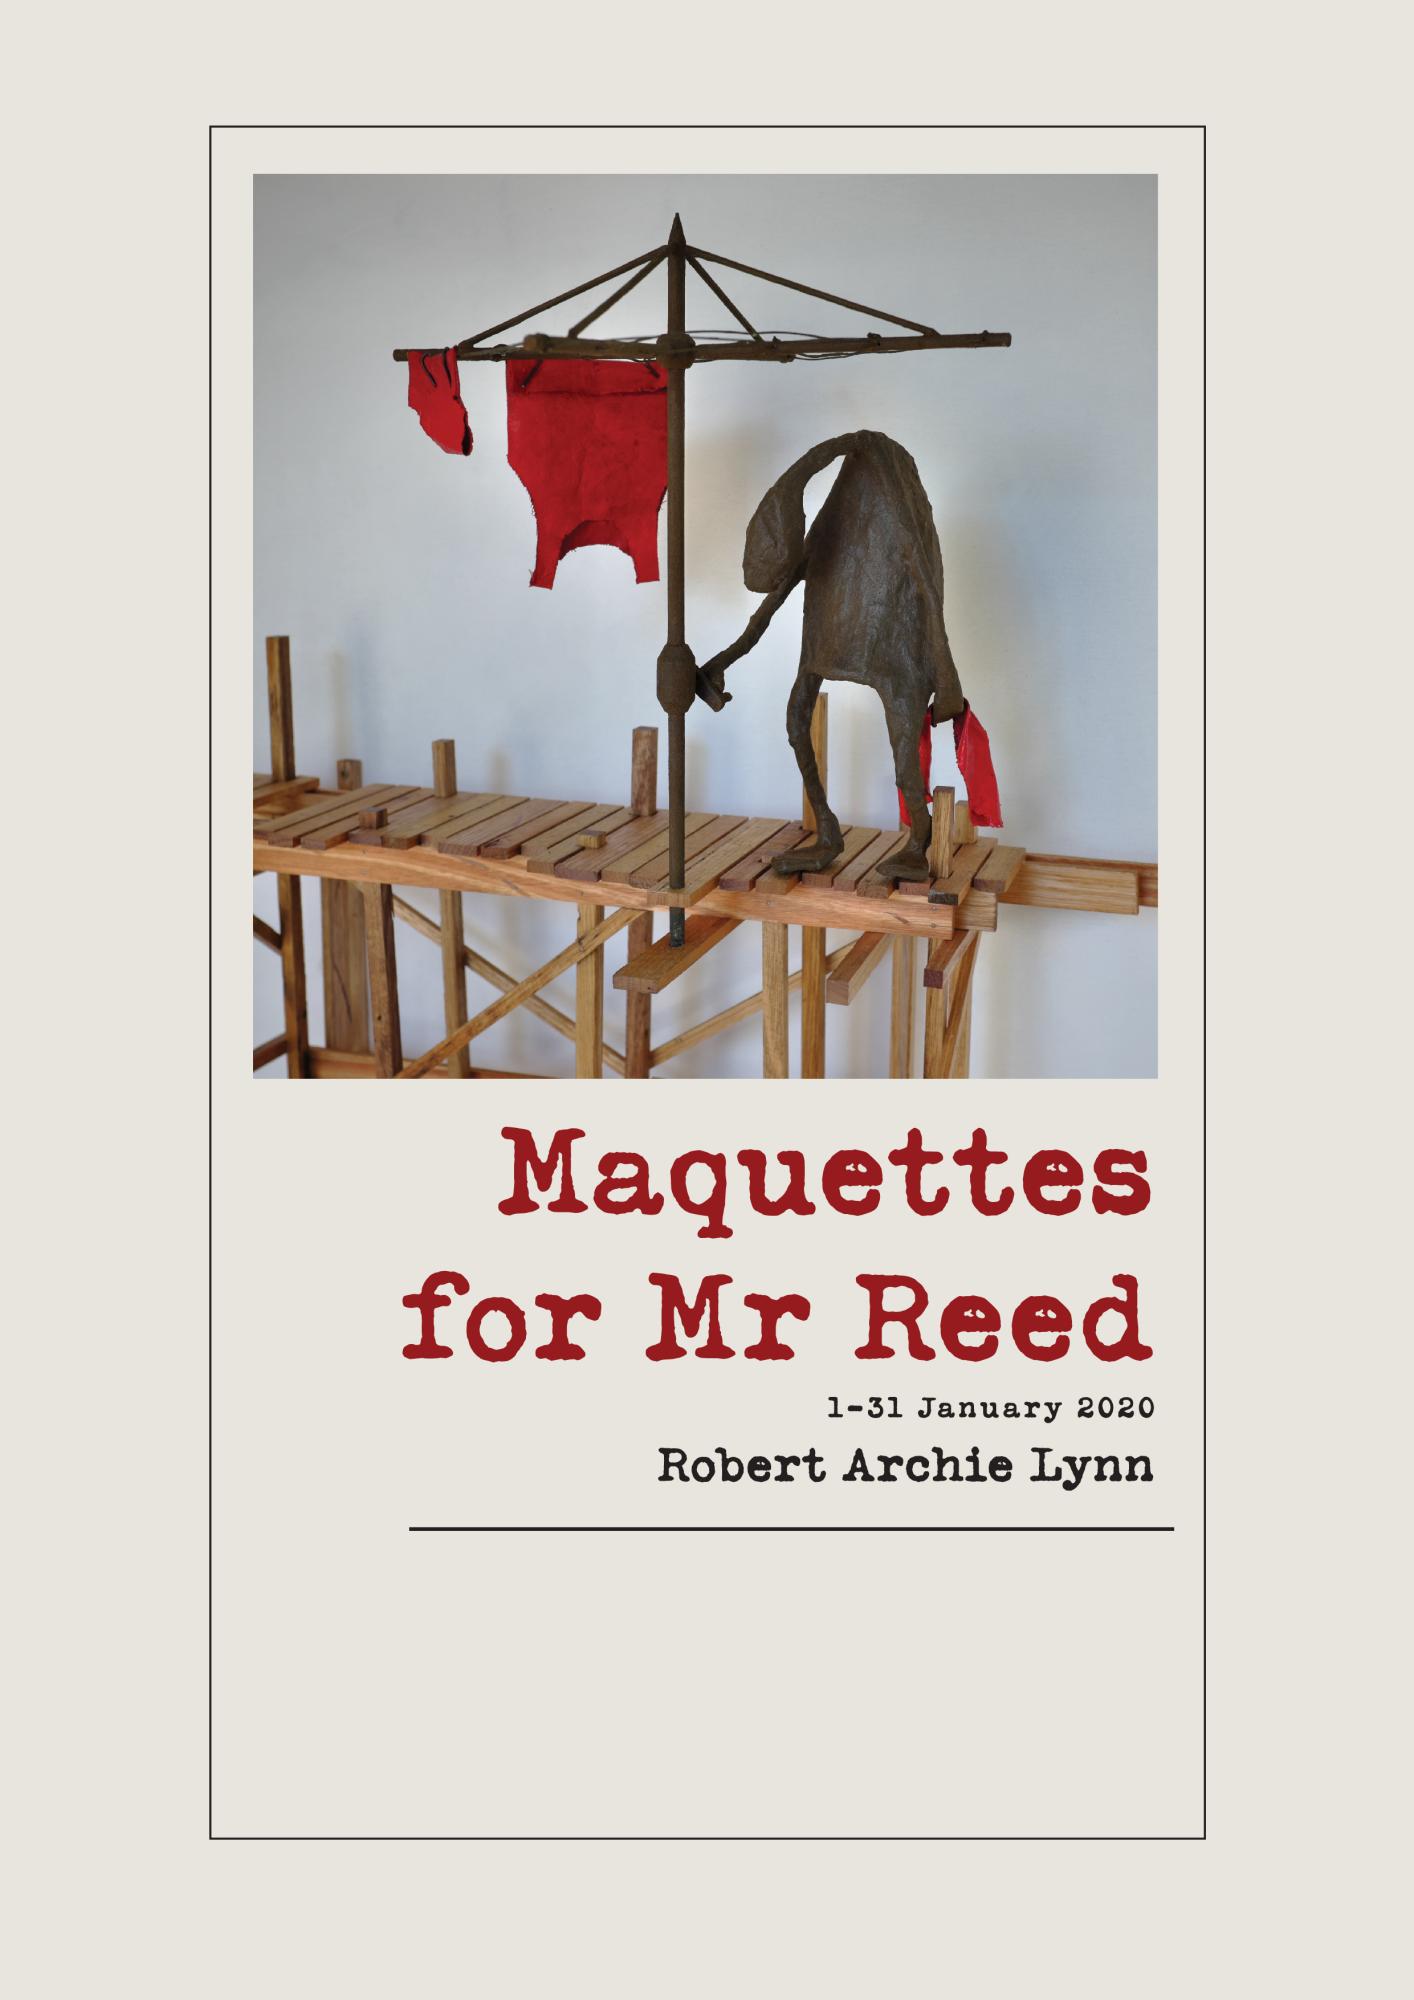 Maquettes of Mr Reed